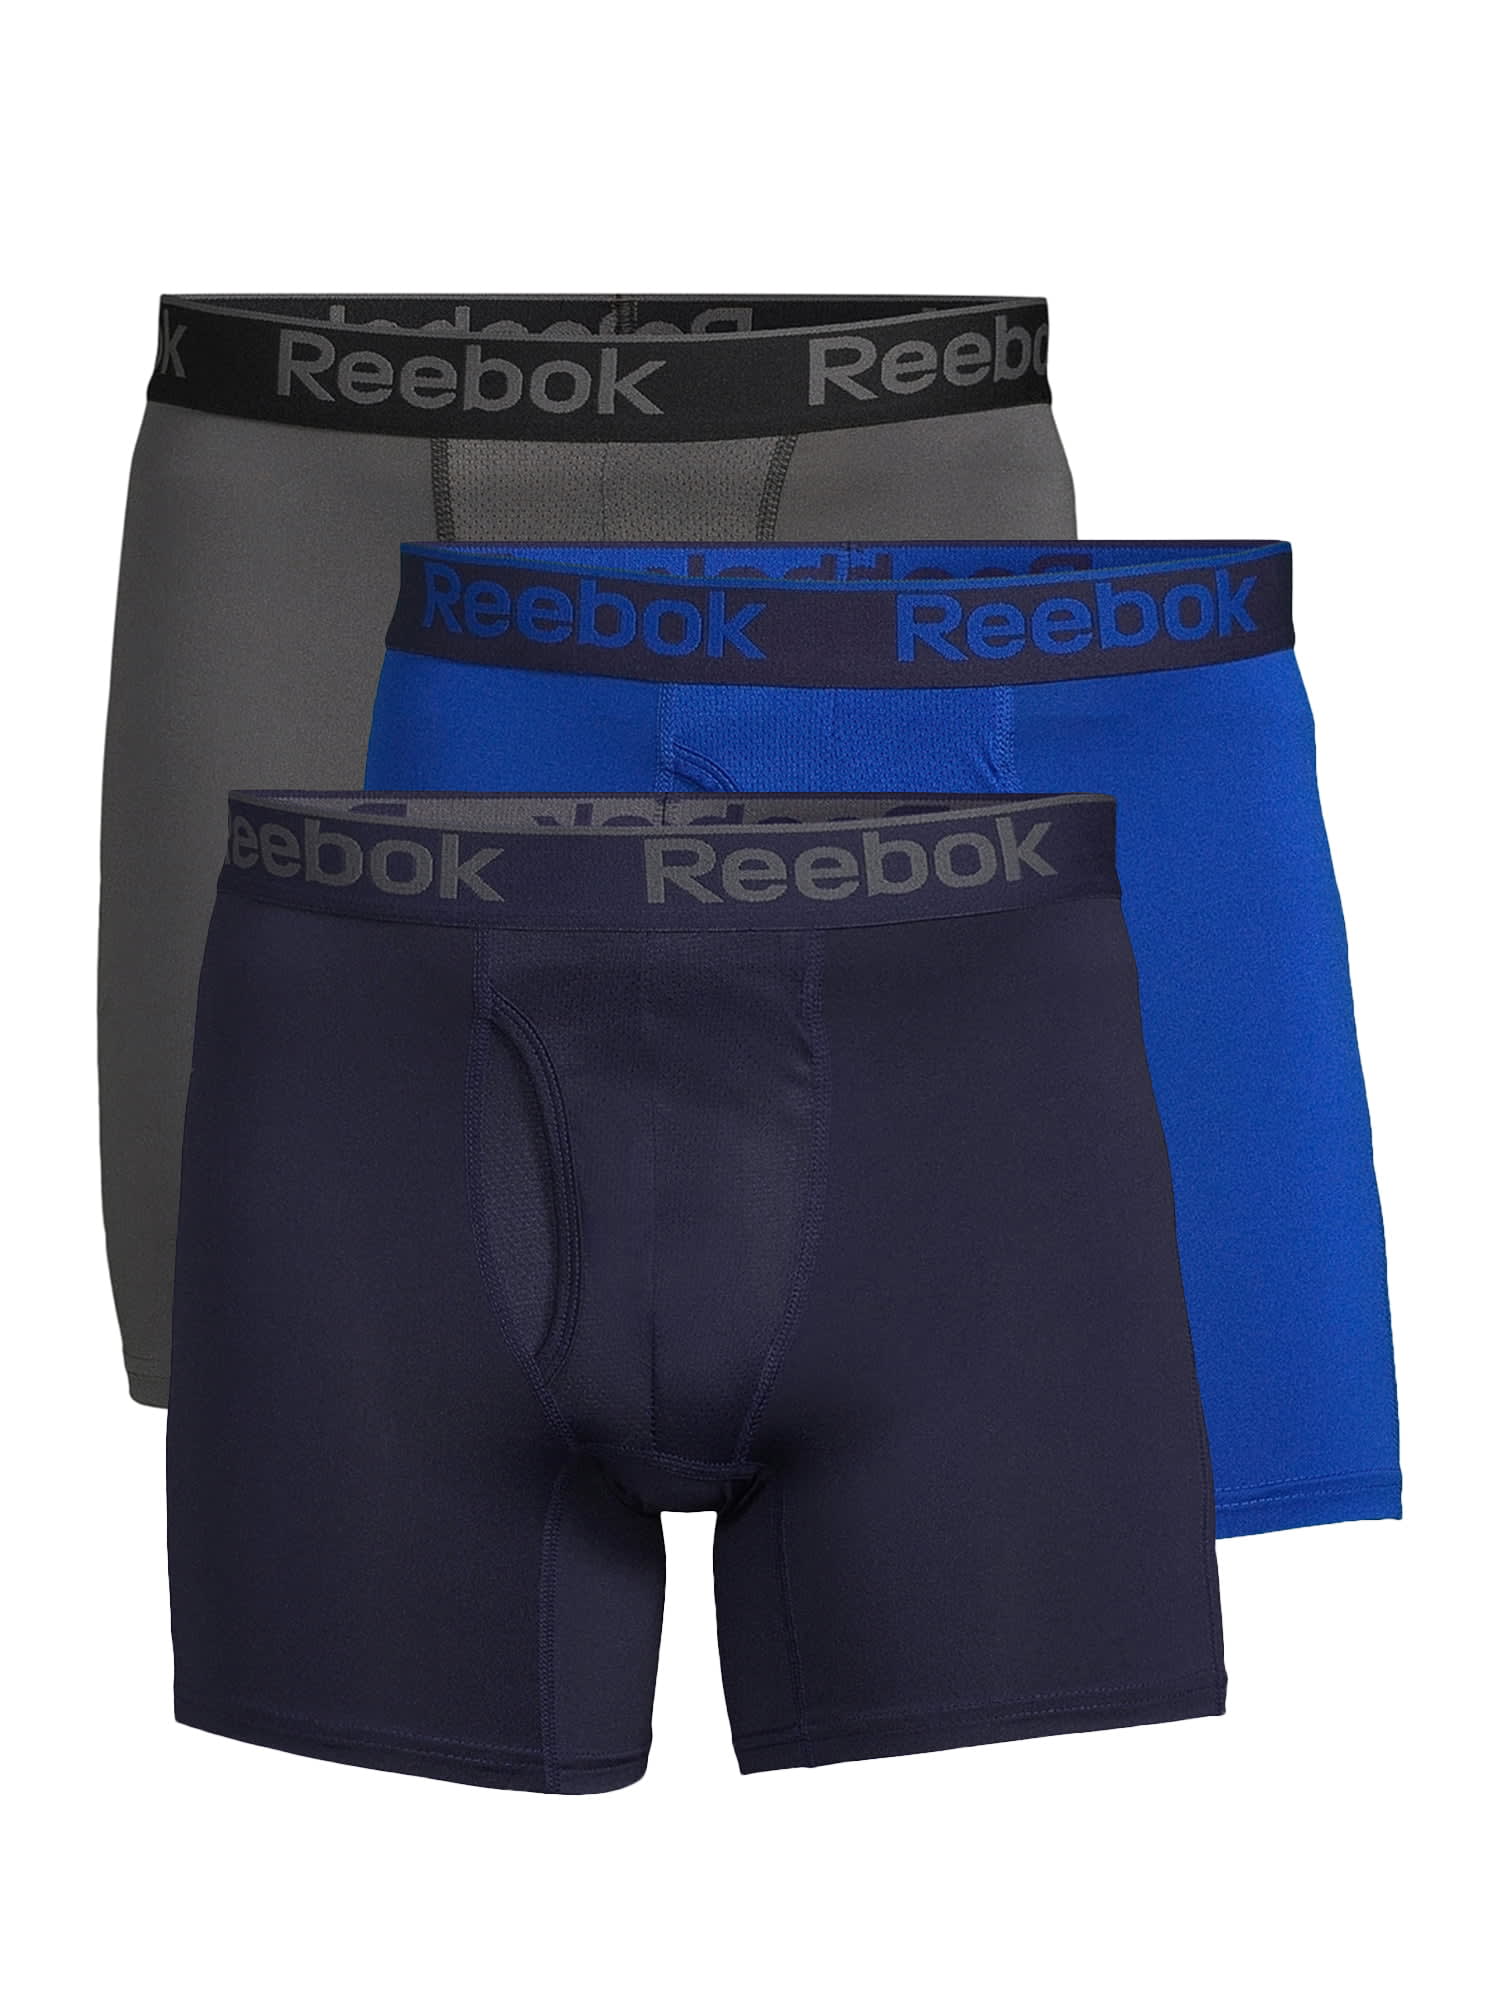 Reebok Men's Pro Series Performance Boxer Brief Extended Length